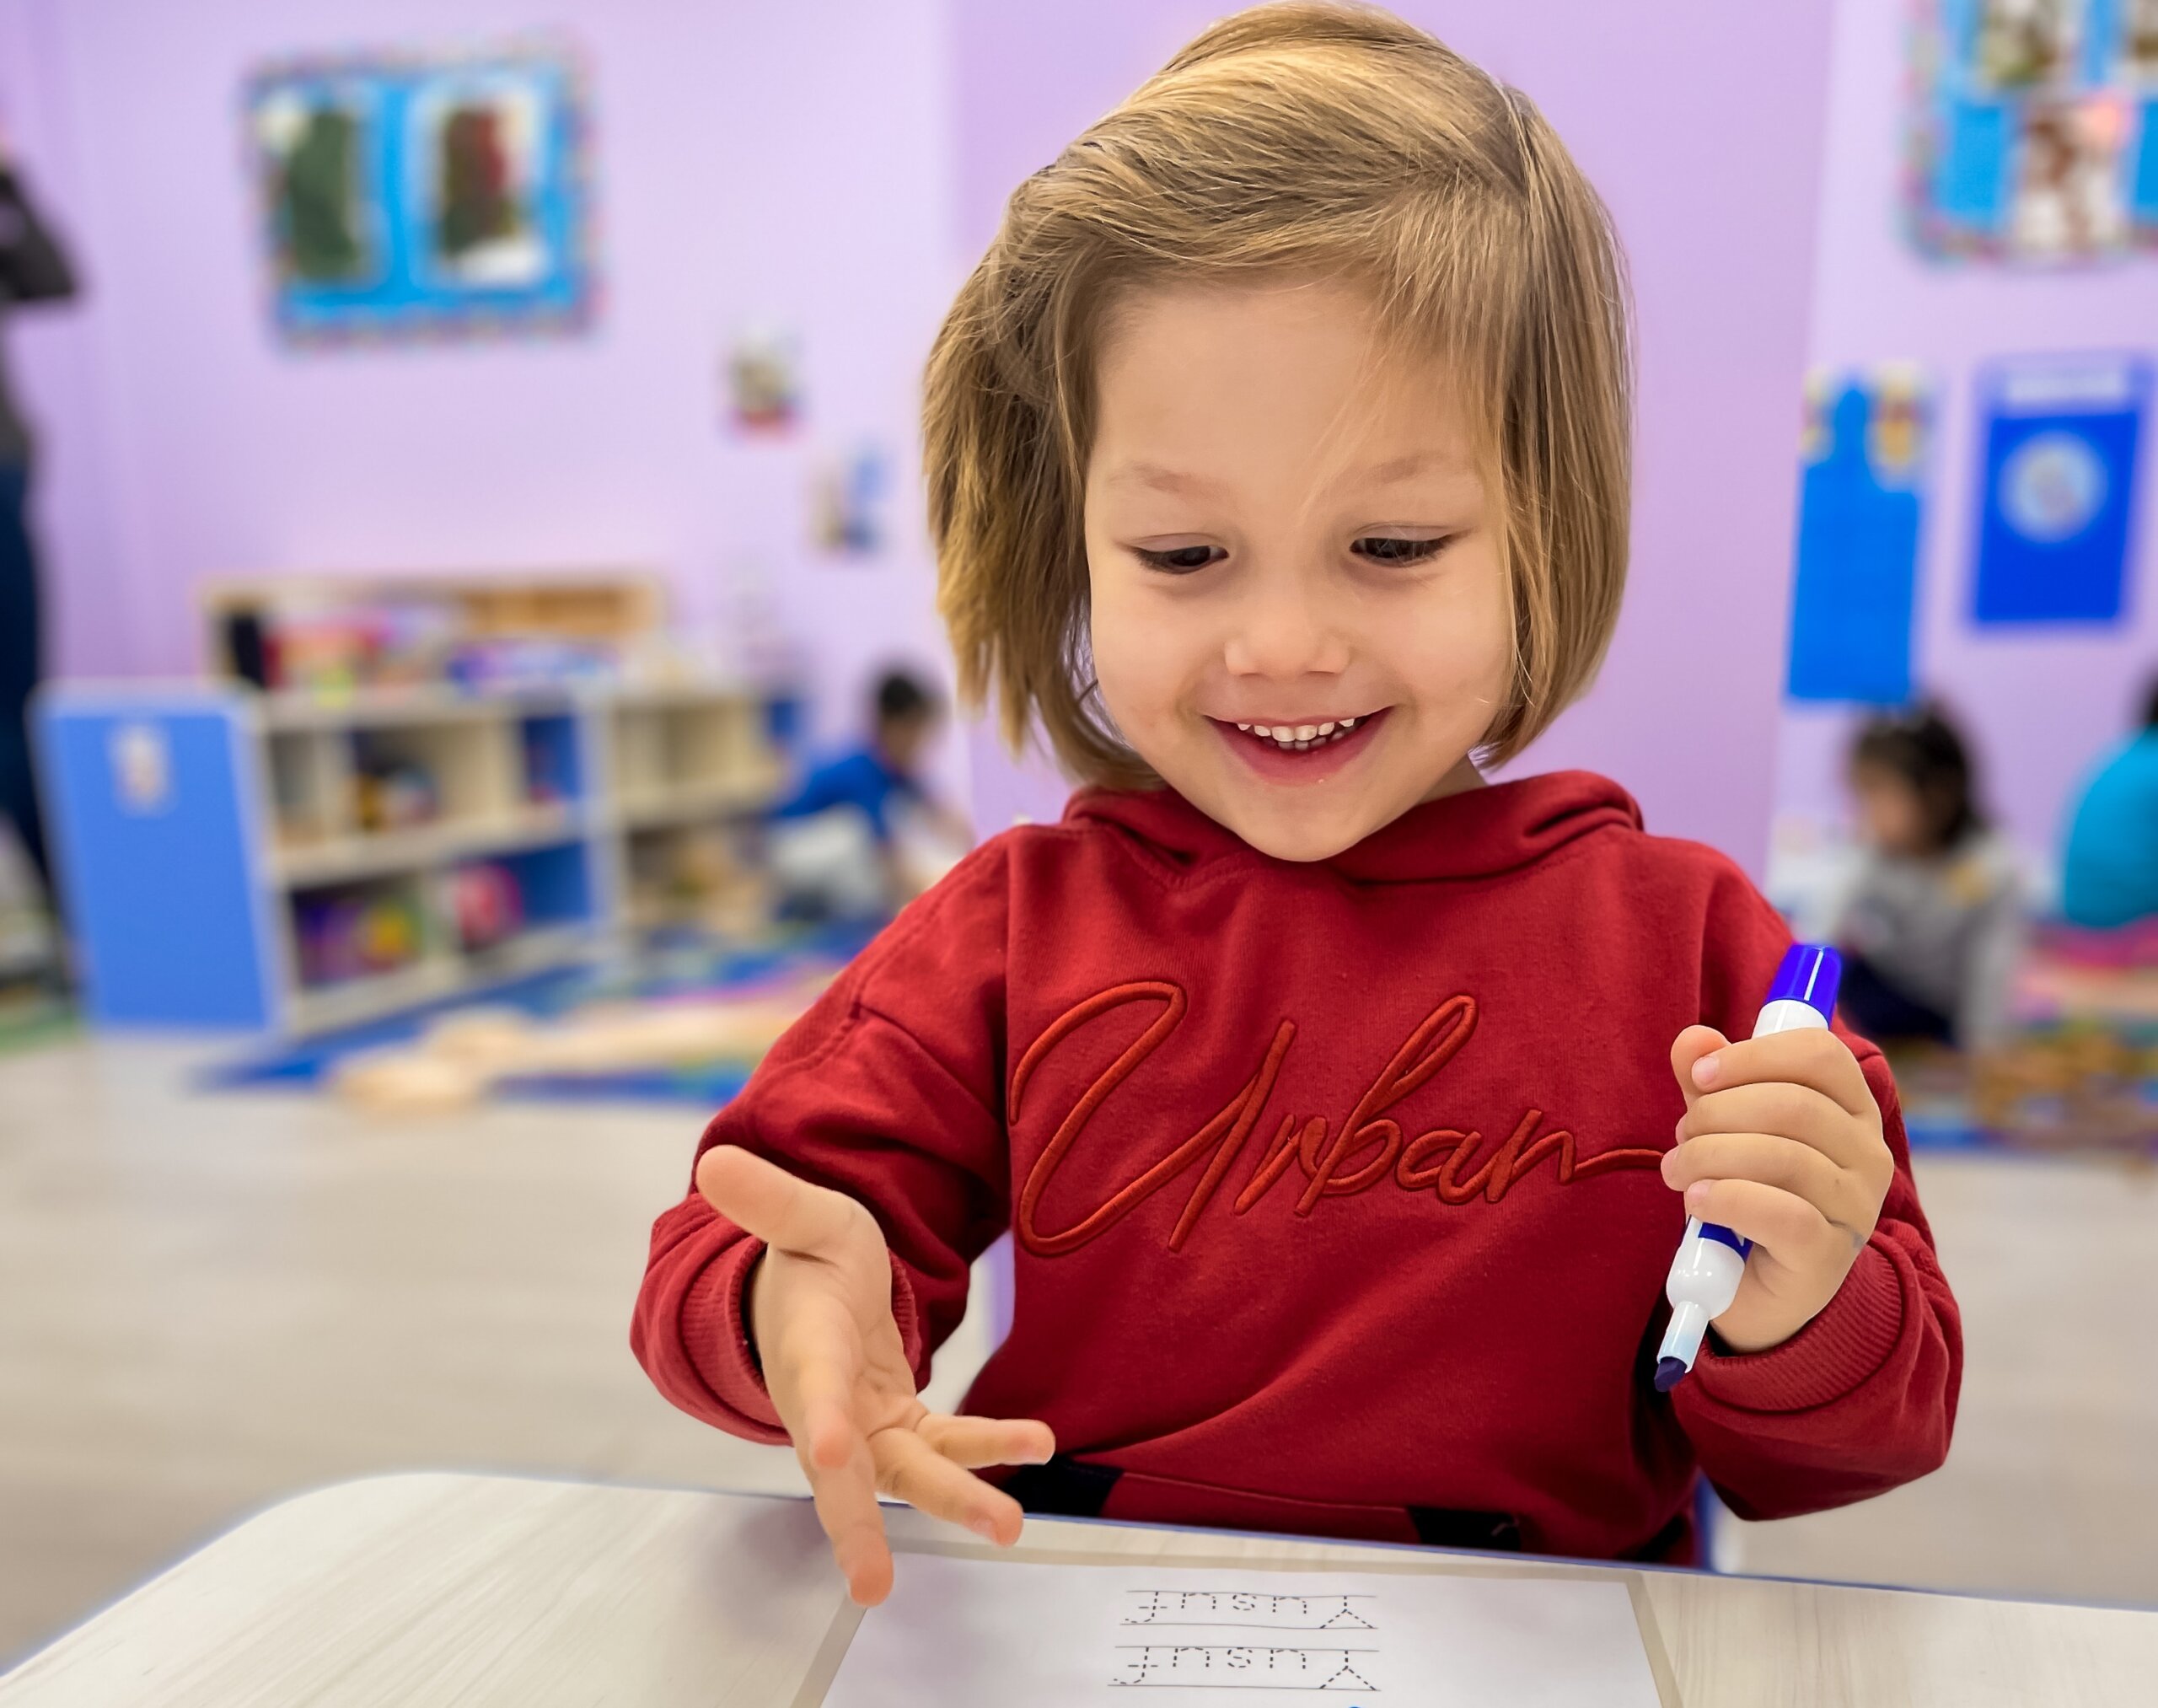 Smiling child in a red hoodie writing on paper with a marker in a colorful classroom setting with other children and toys in the background